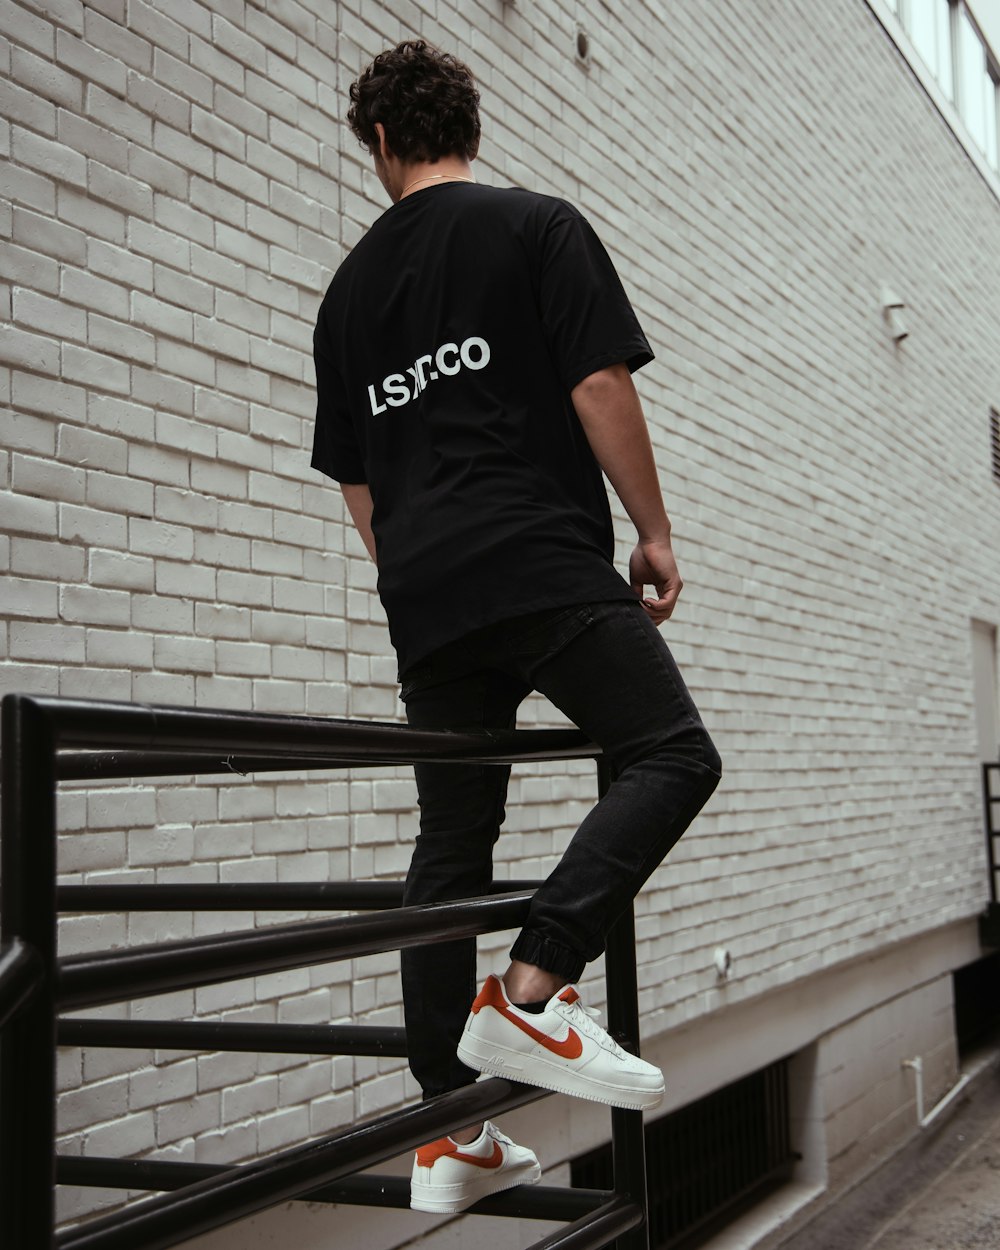 Man In Black And White Adidas T-Shirt And Black Pants Wearing White Nike  Sneakers Photo – Free Los Angeles Image On Unsplash